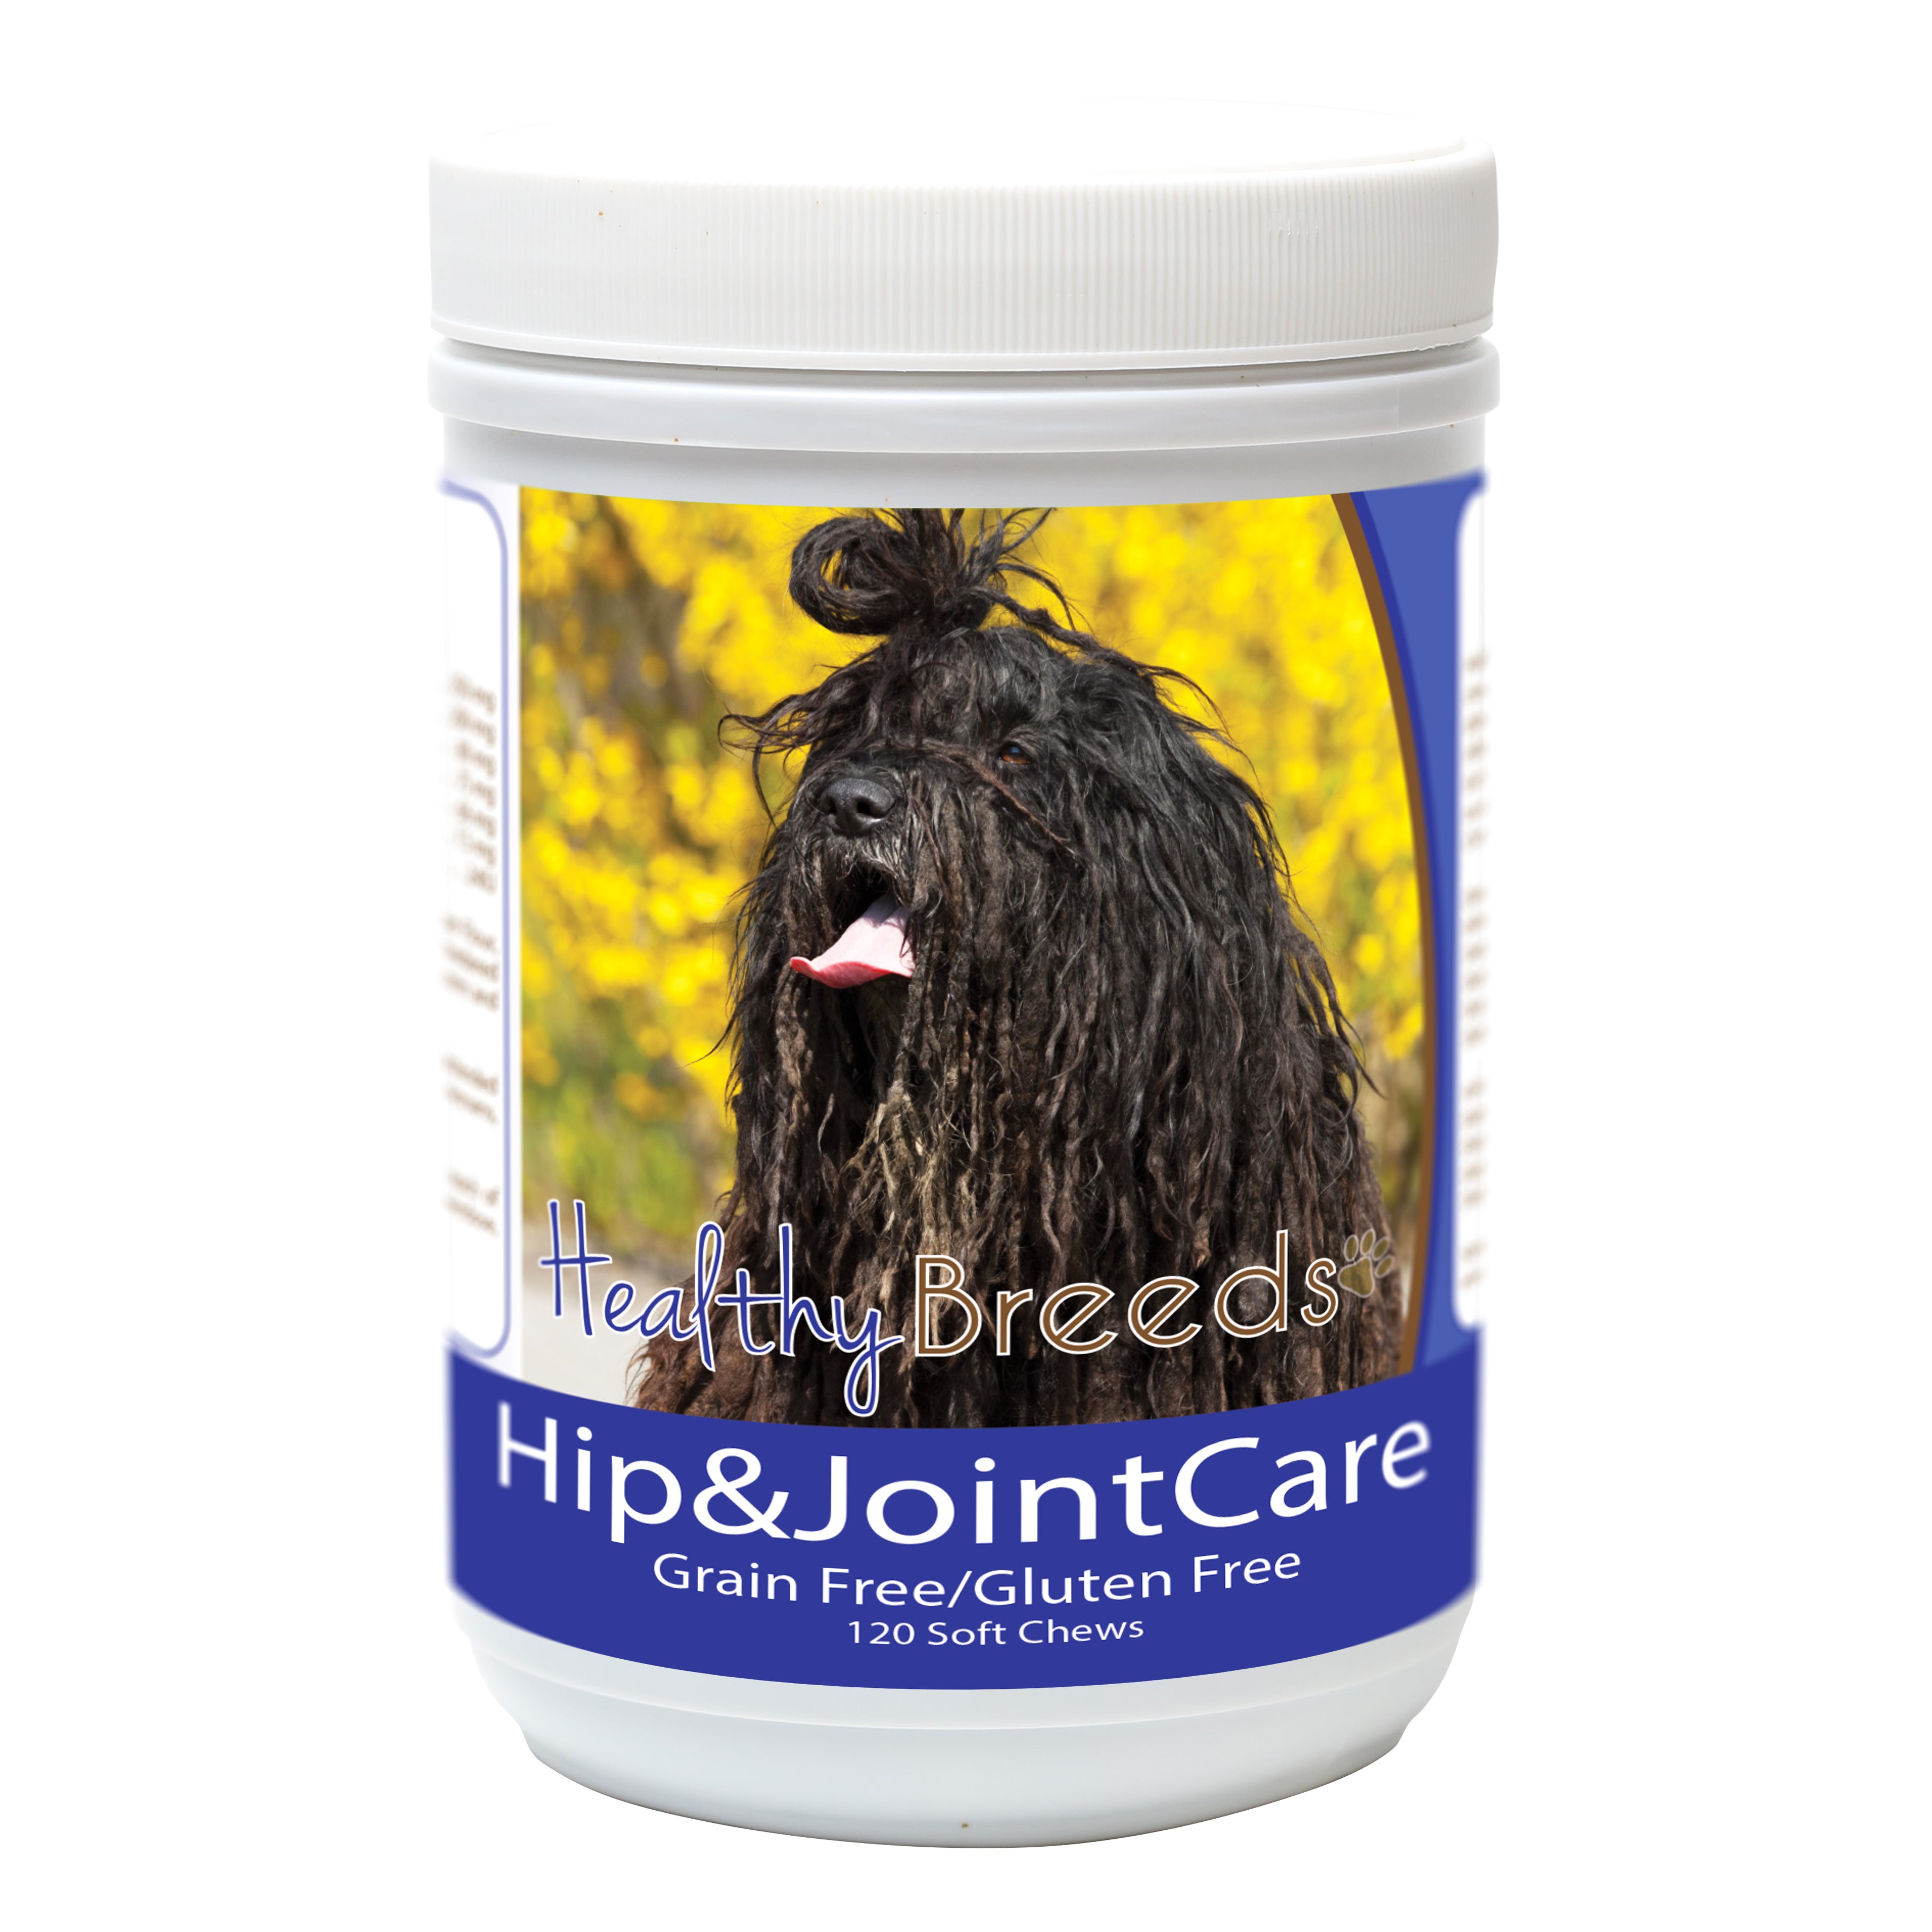 Bergamasco Hip and Joint Care 120 Count